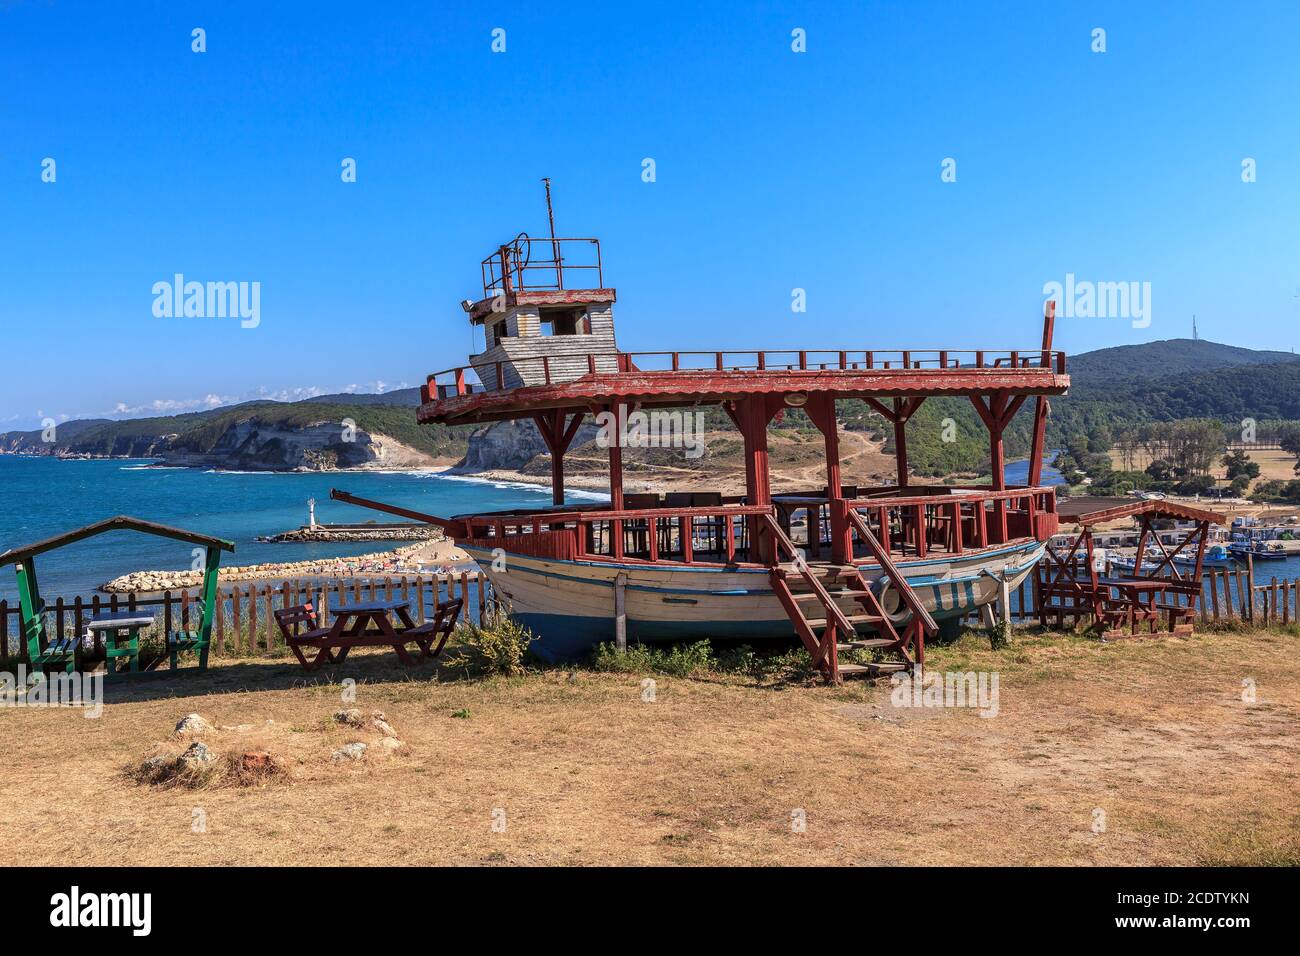 Old boat on the hill, Kiyikoy beach and harbor in the background Stock Photo